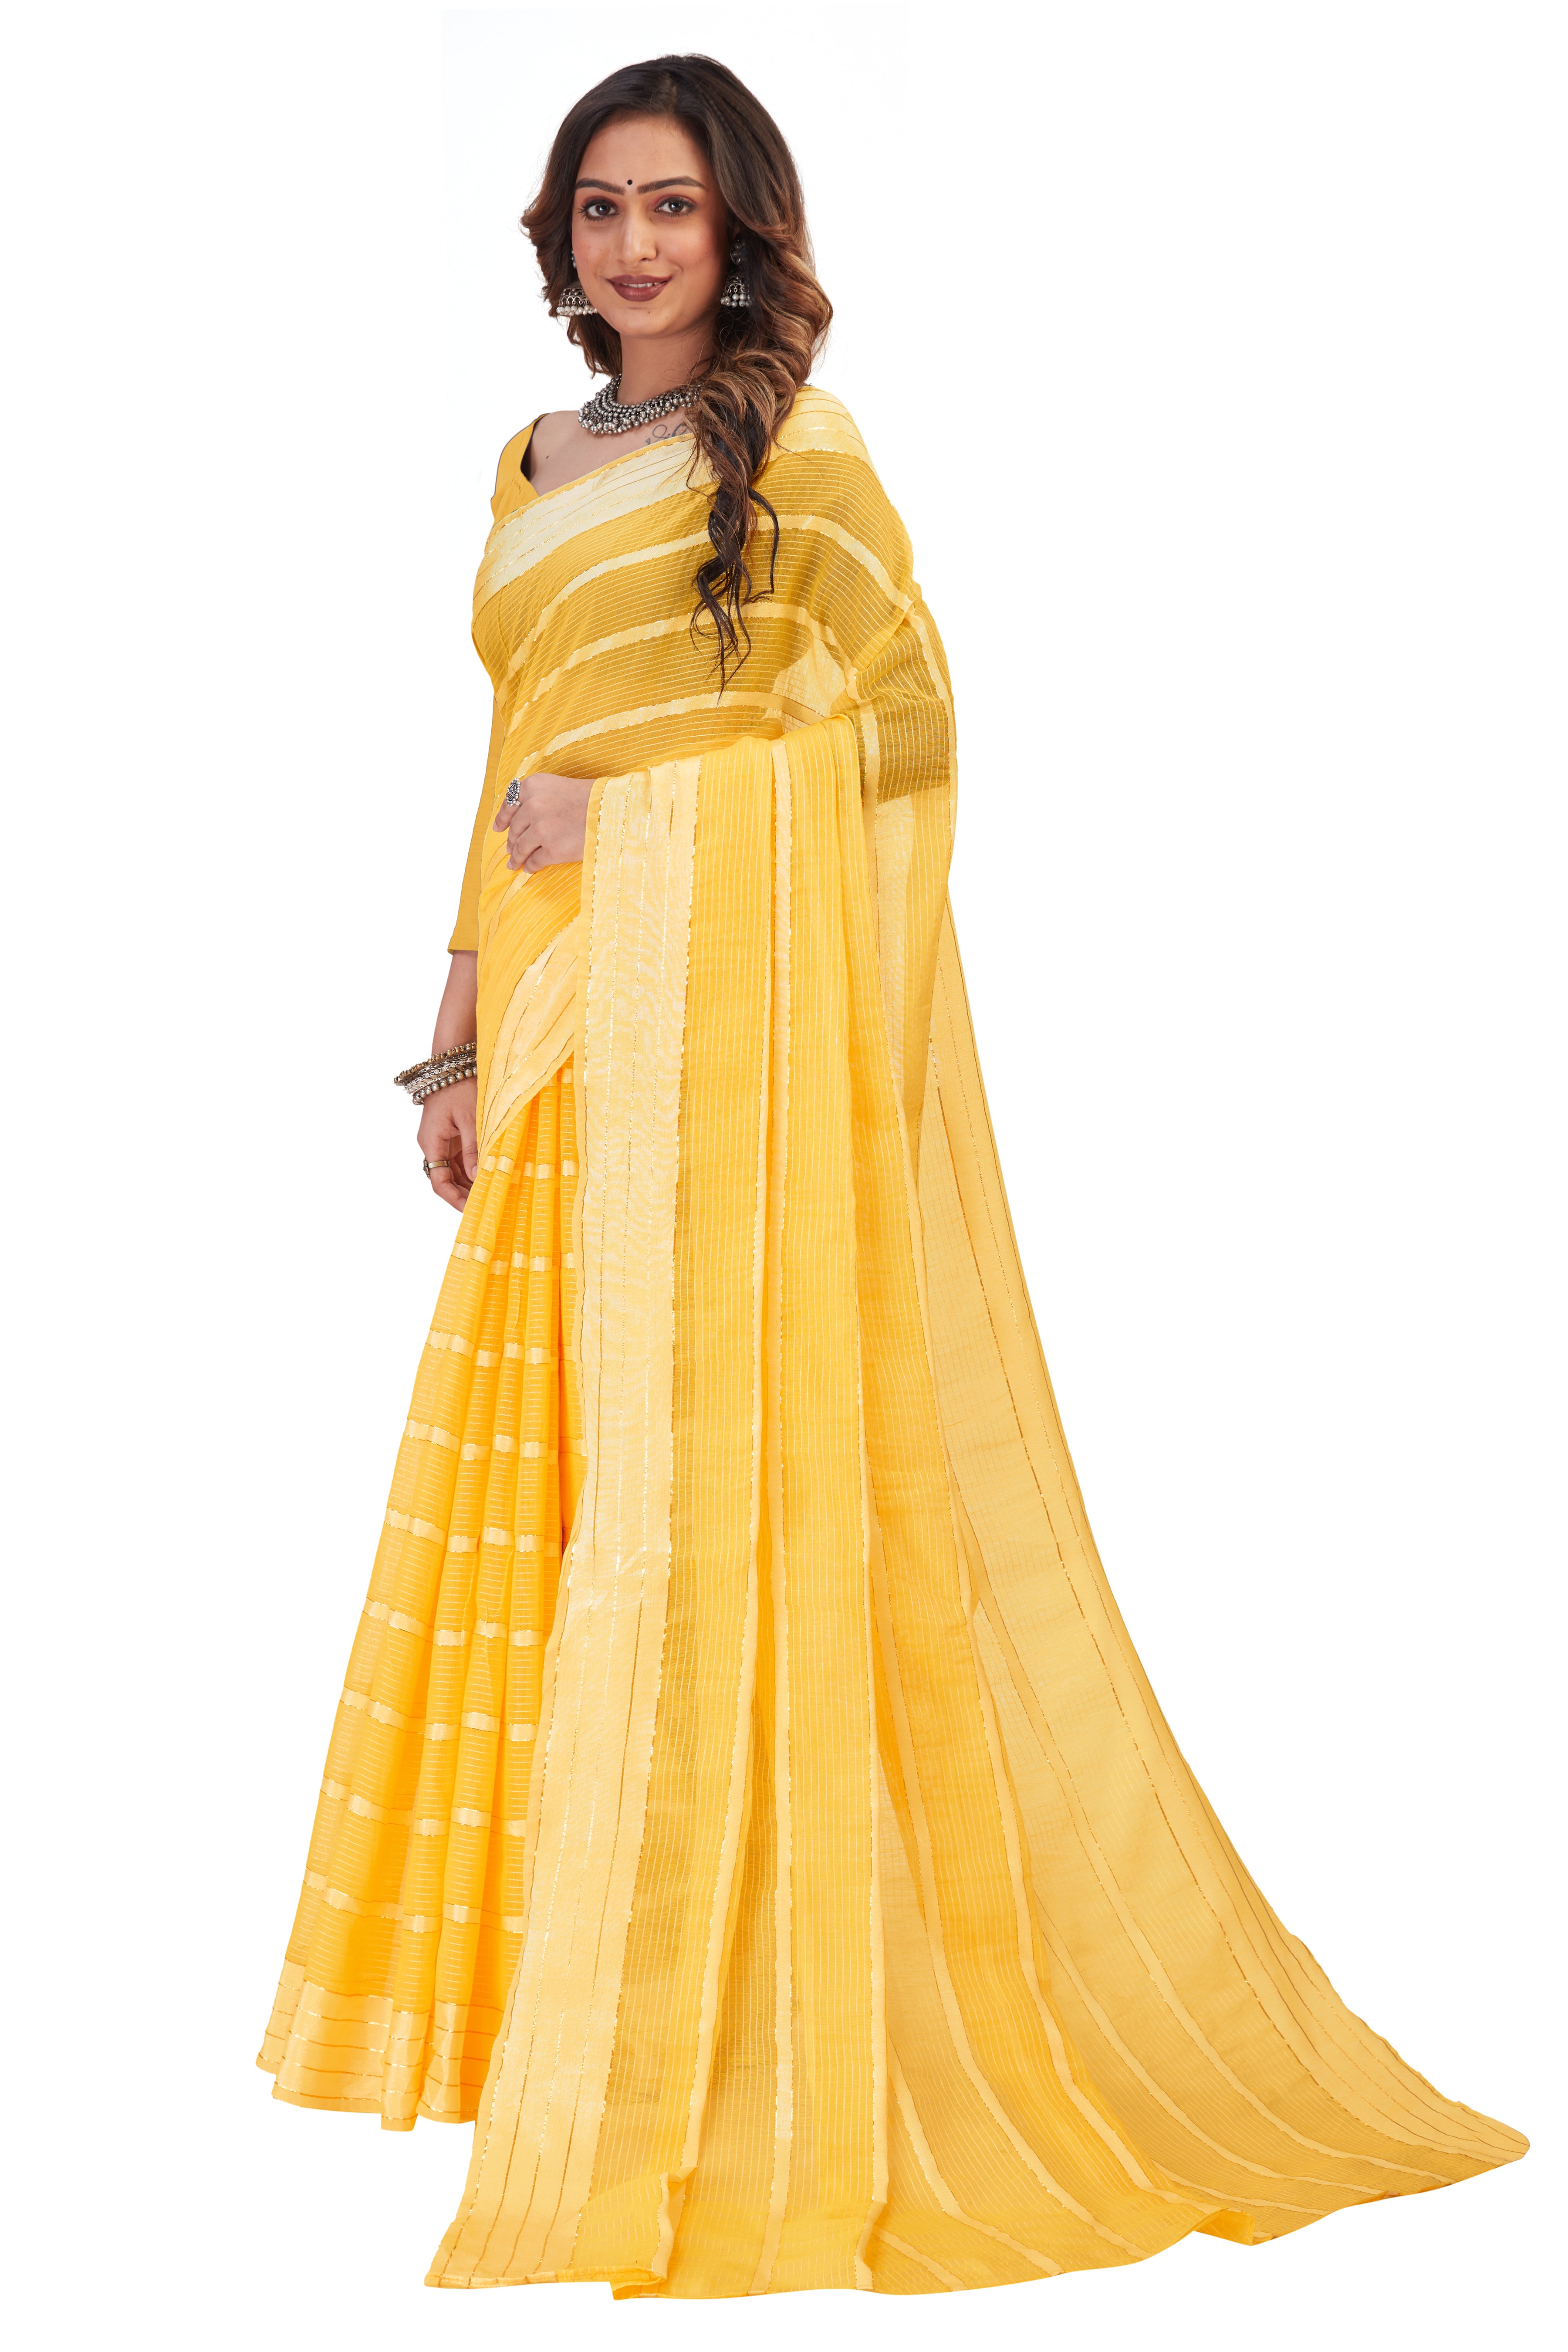 Women's self Woven striped Daily Wear Cotton Blend Sari With Blouse Piece (Yellow) - NIMIDHYA